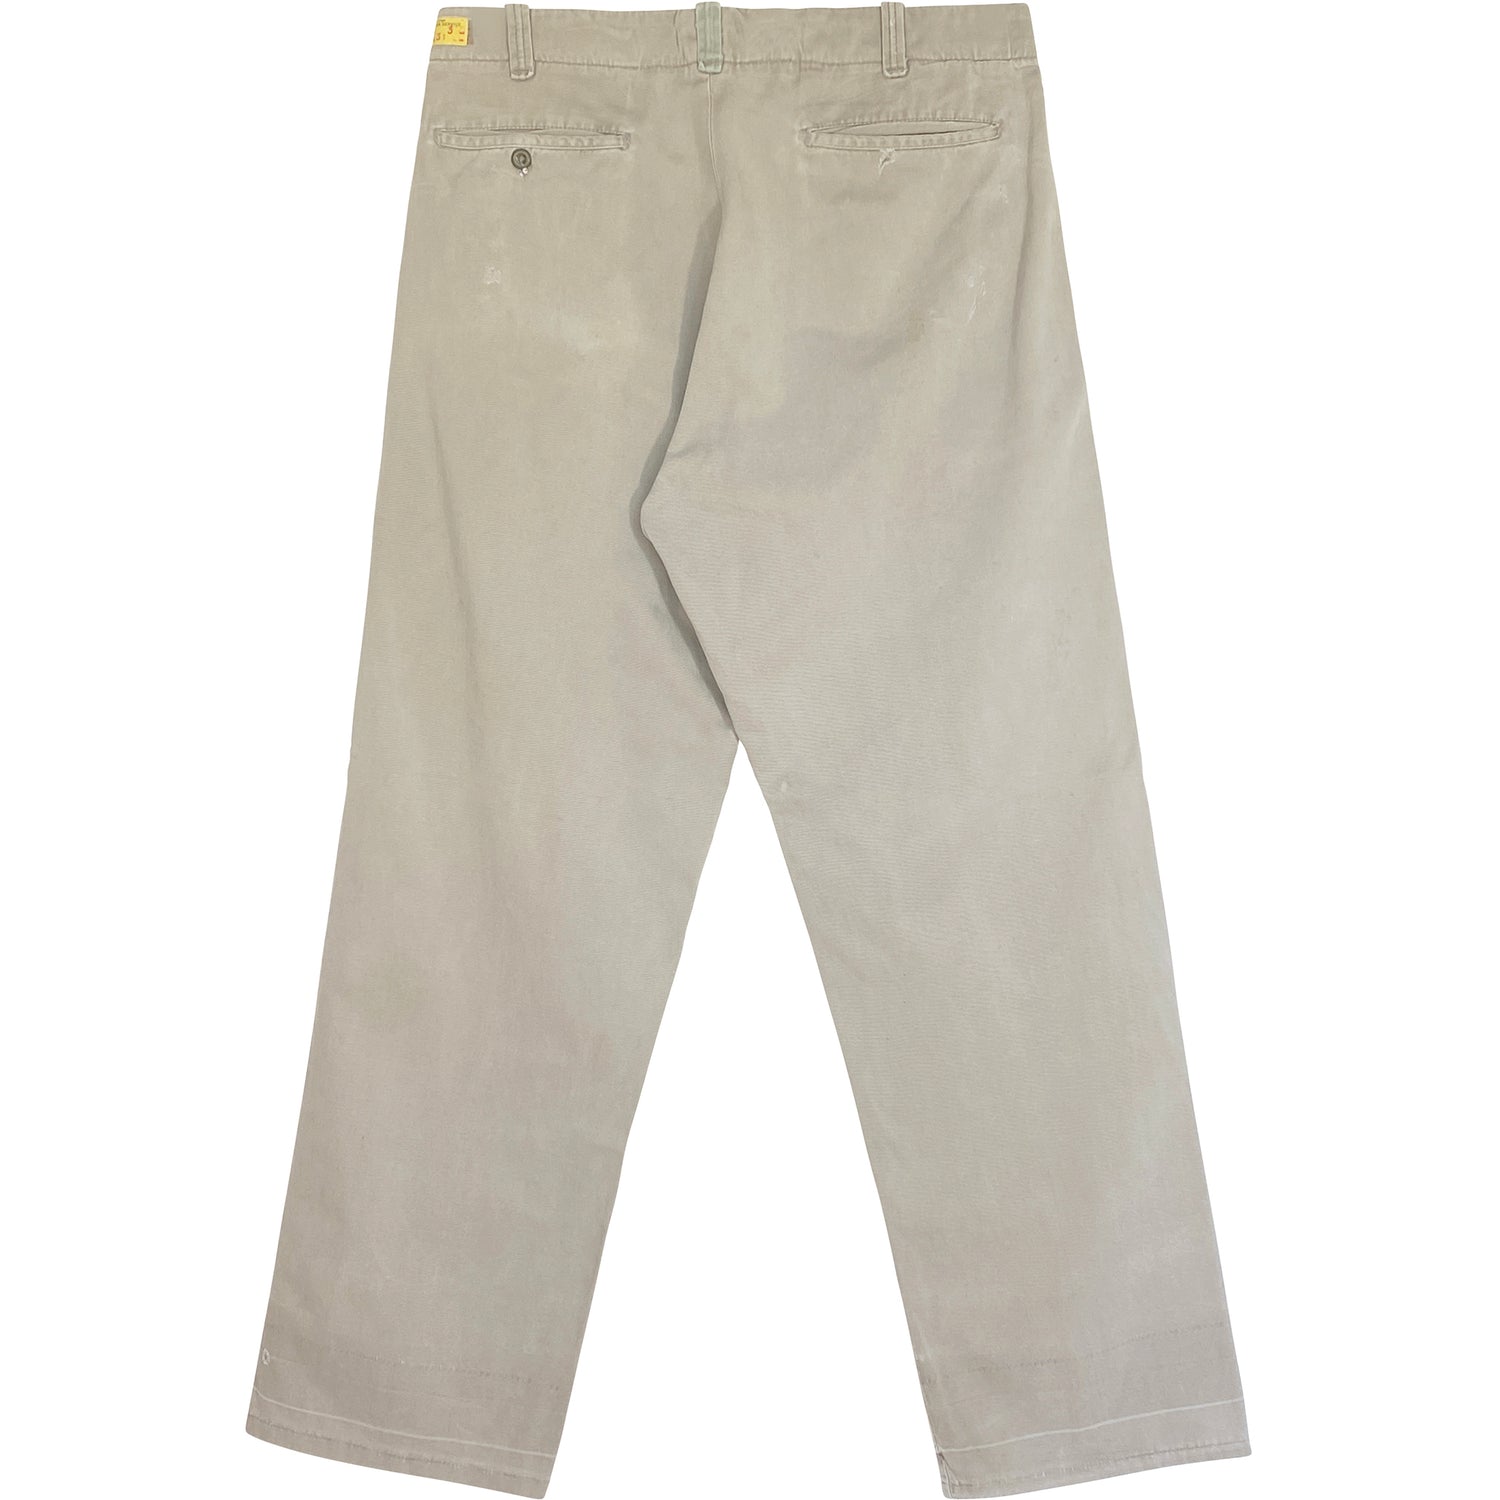 VINTAGE BEAT UP WORK CHINOS - Size 30